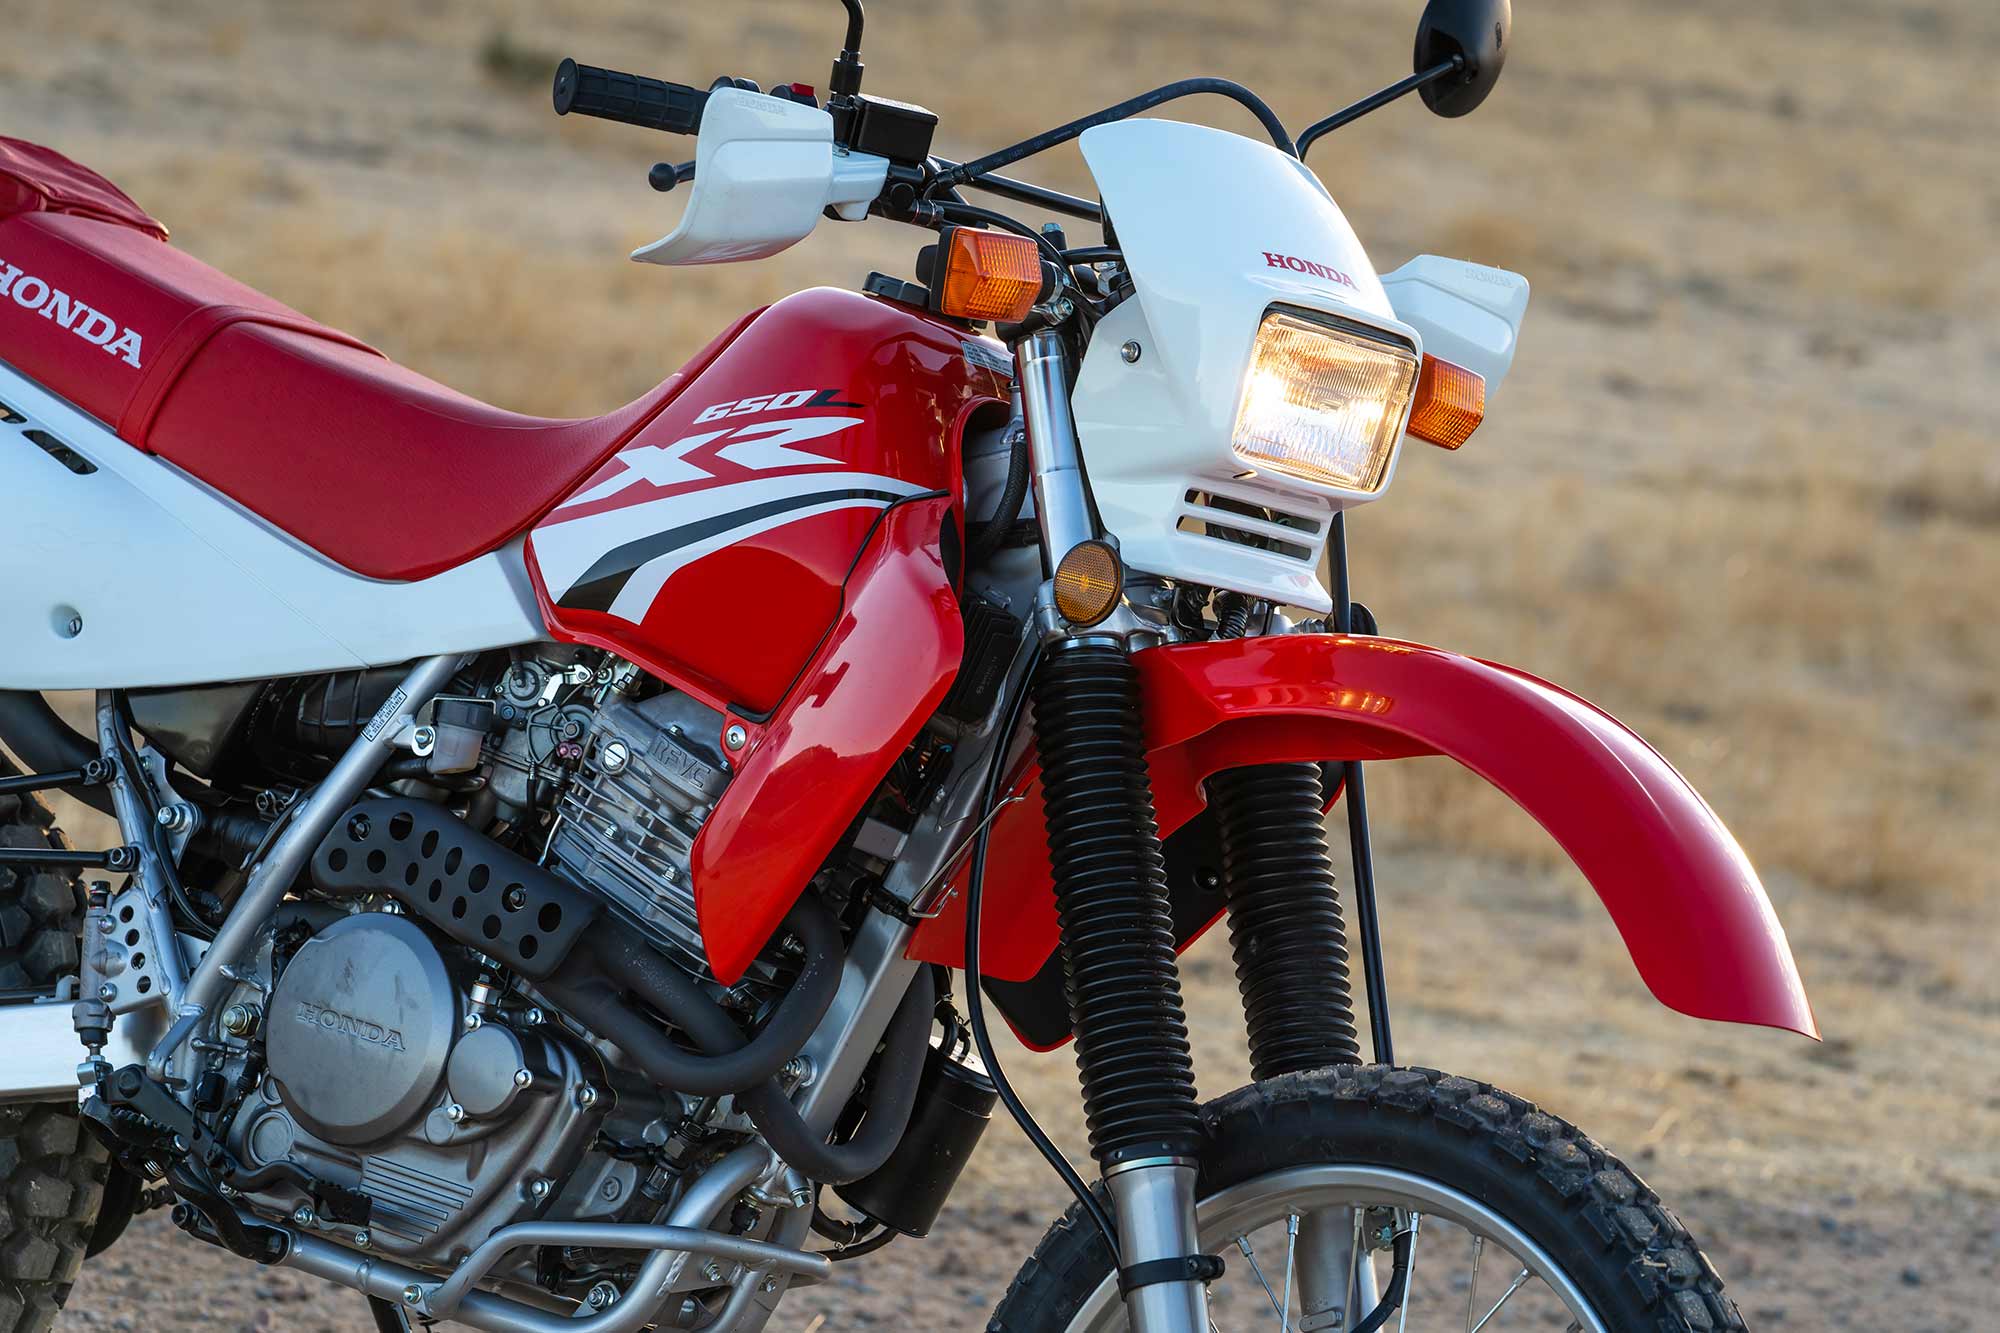 2021 Honda Xr650L Buyer'S Guide: Specs, Photos, Price | Cycle World